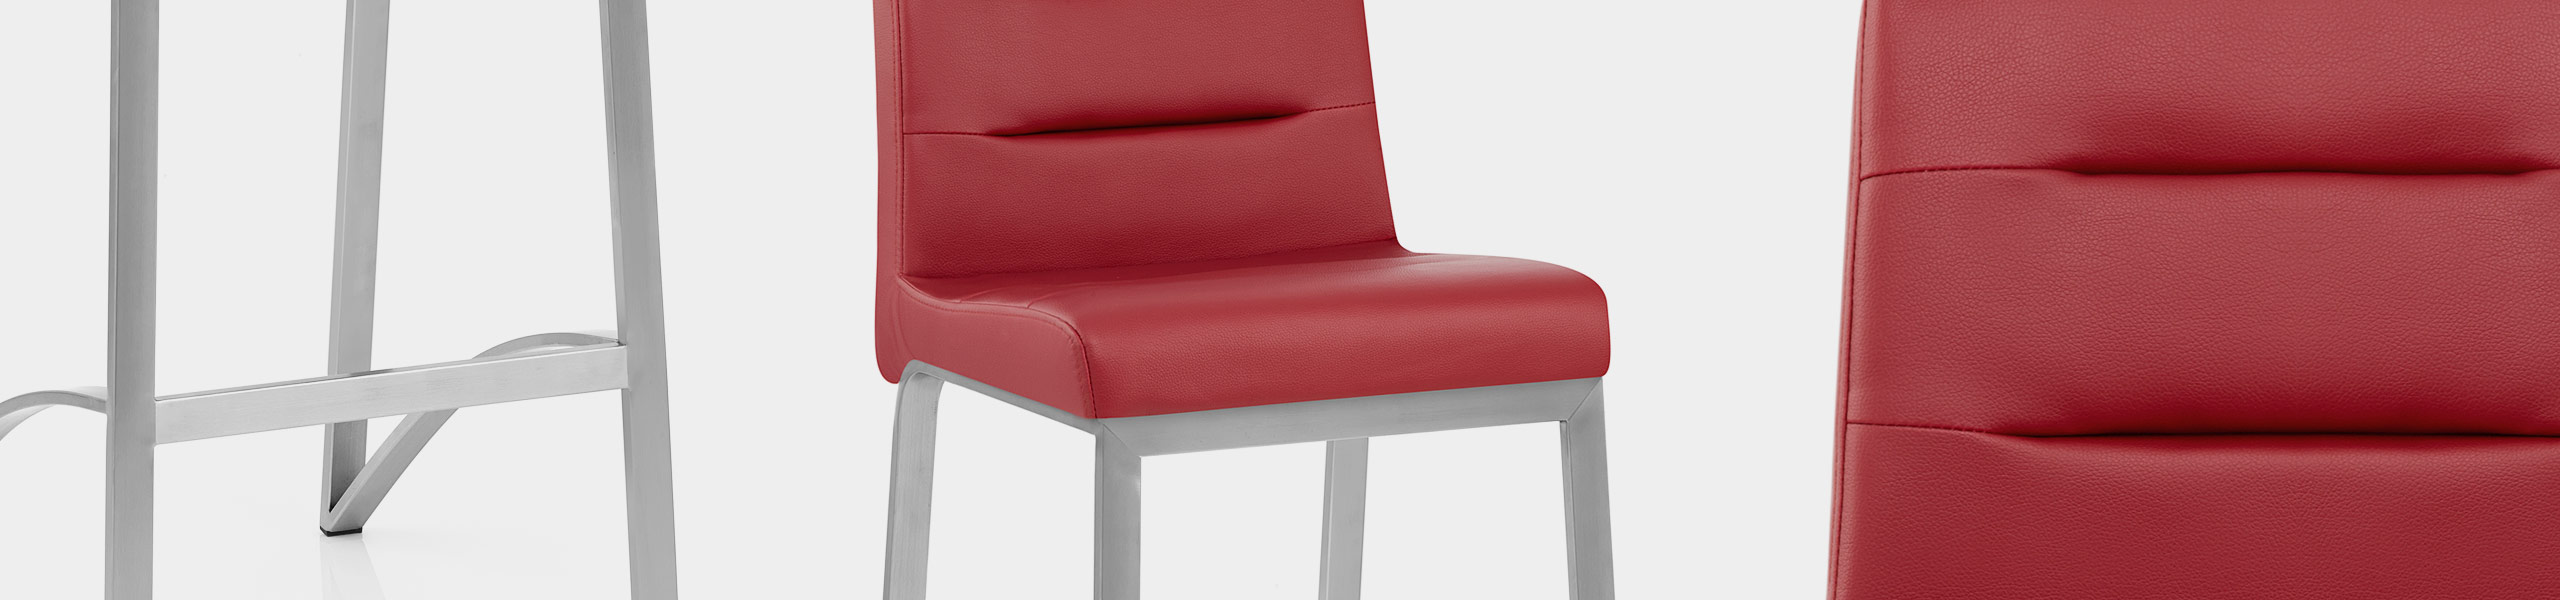 Stella Brushed Steel Stool Red Video Banner